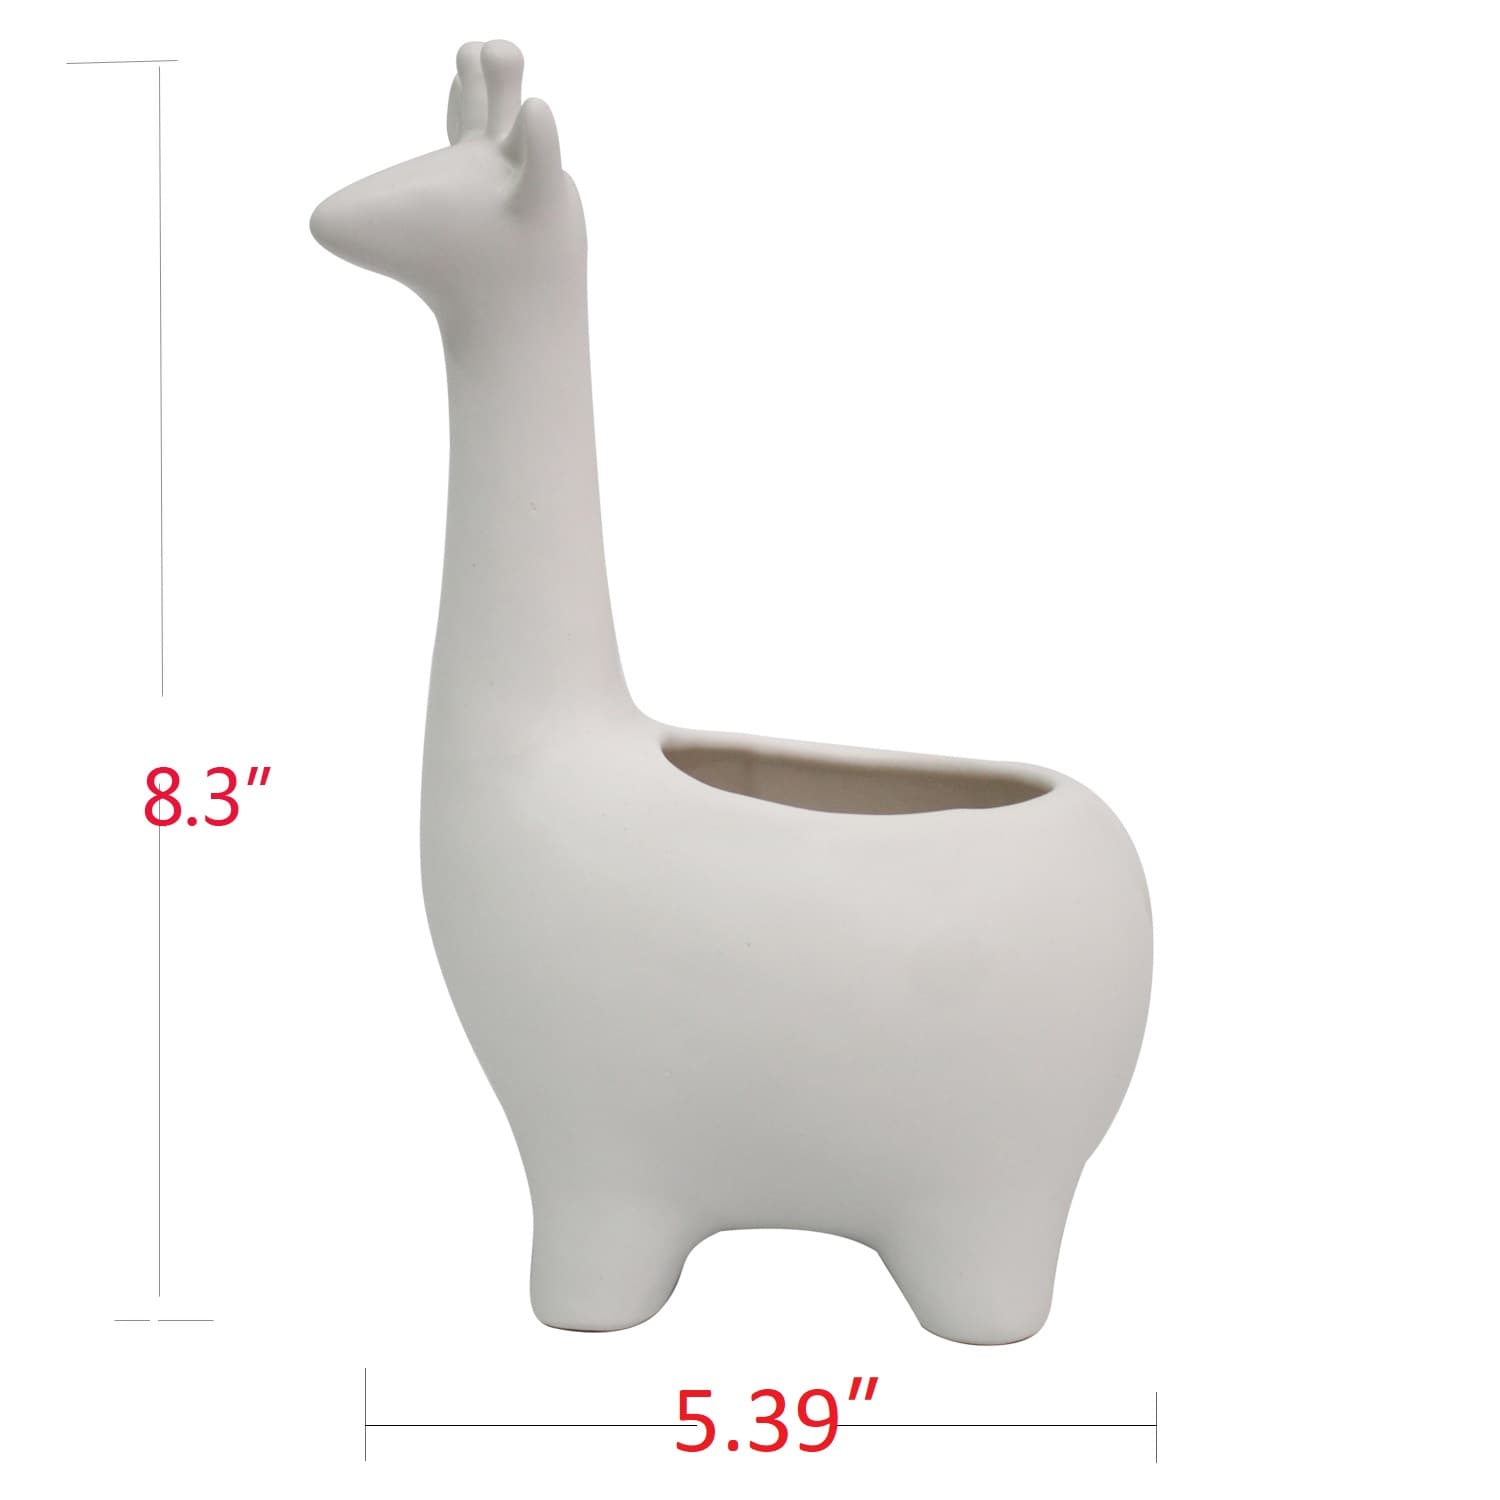 allen + roth 5.39-in x White Ceramic Planter with Drainage Holes in the & Planters department at Lowes.com